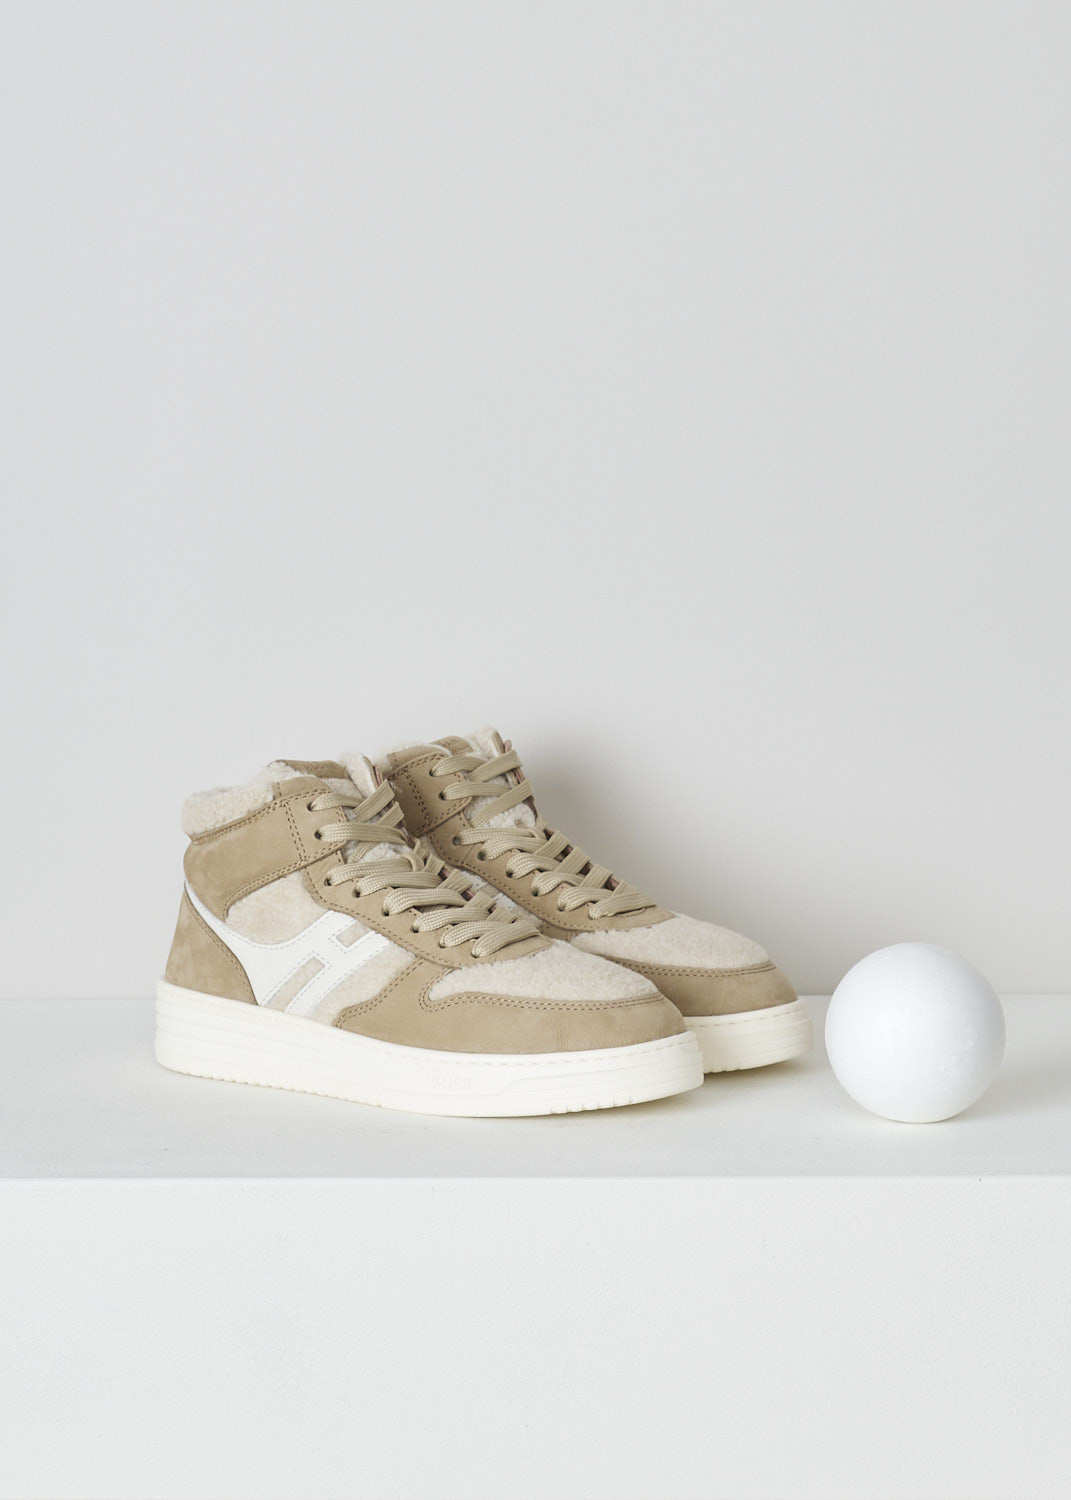 HOGAN, BEIGE TEDDY H630 BASKET SNEAKERS, GYW6300FE30SQW02S1_SQW, Beige, Front, These beige H630 Basket sneakers feature a front lace-up fastening with beige laces. On the tongue, a  brown leather tab has the brand's logo embossed on it. The sneaker consist of brown suede and white teddy fabric. On the side, the brand's H logo has been incorporated in the design in white leather.  These sneakers have a thick white sole. They come with an additional pair of laces in brown.   
